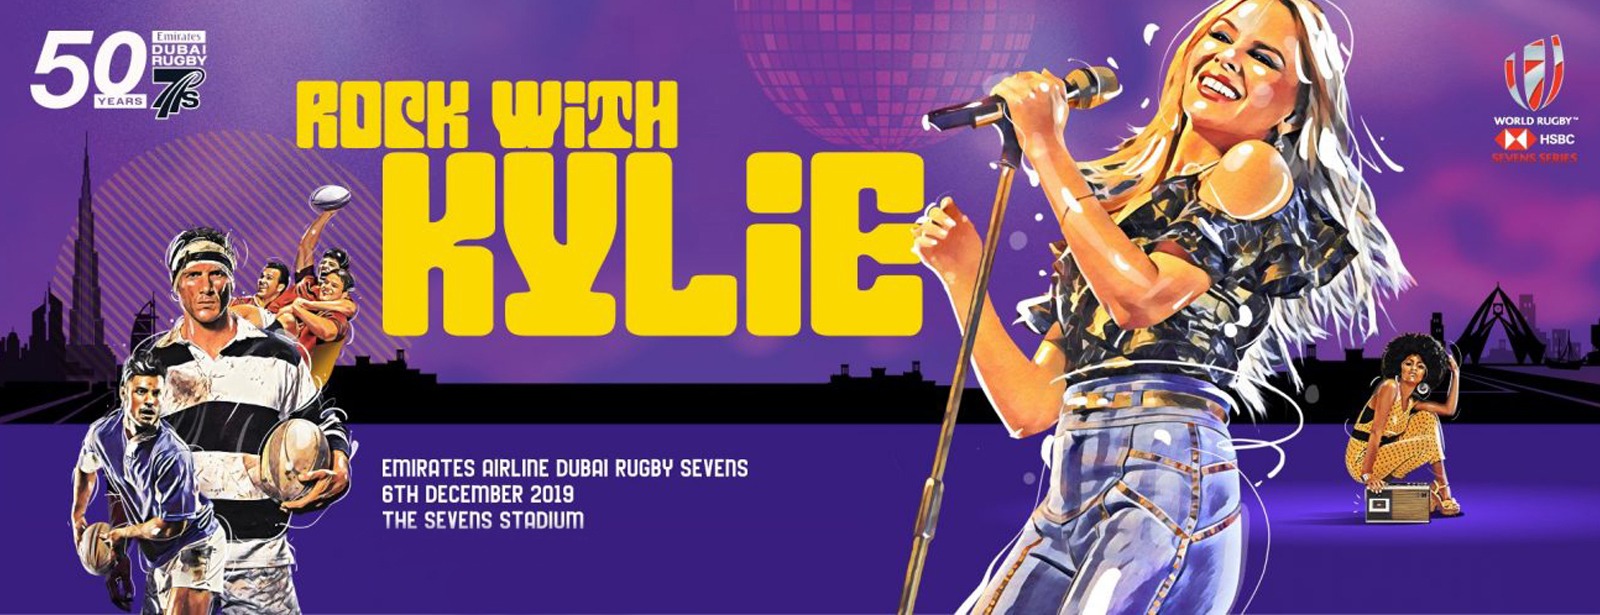 Kylie Minogue at Emirates Airline Dubai Rugby Sevens - Coming Soon in UAE